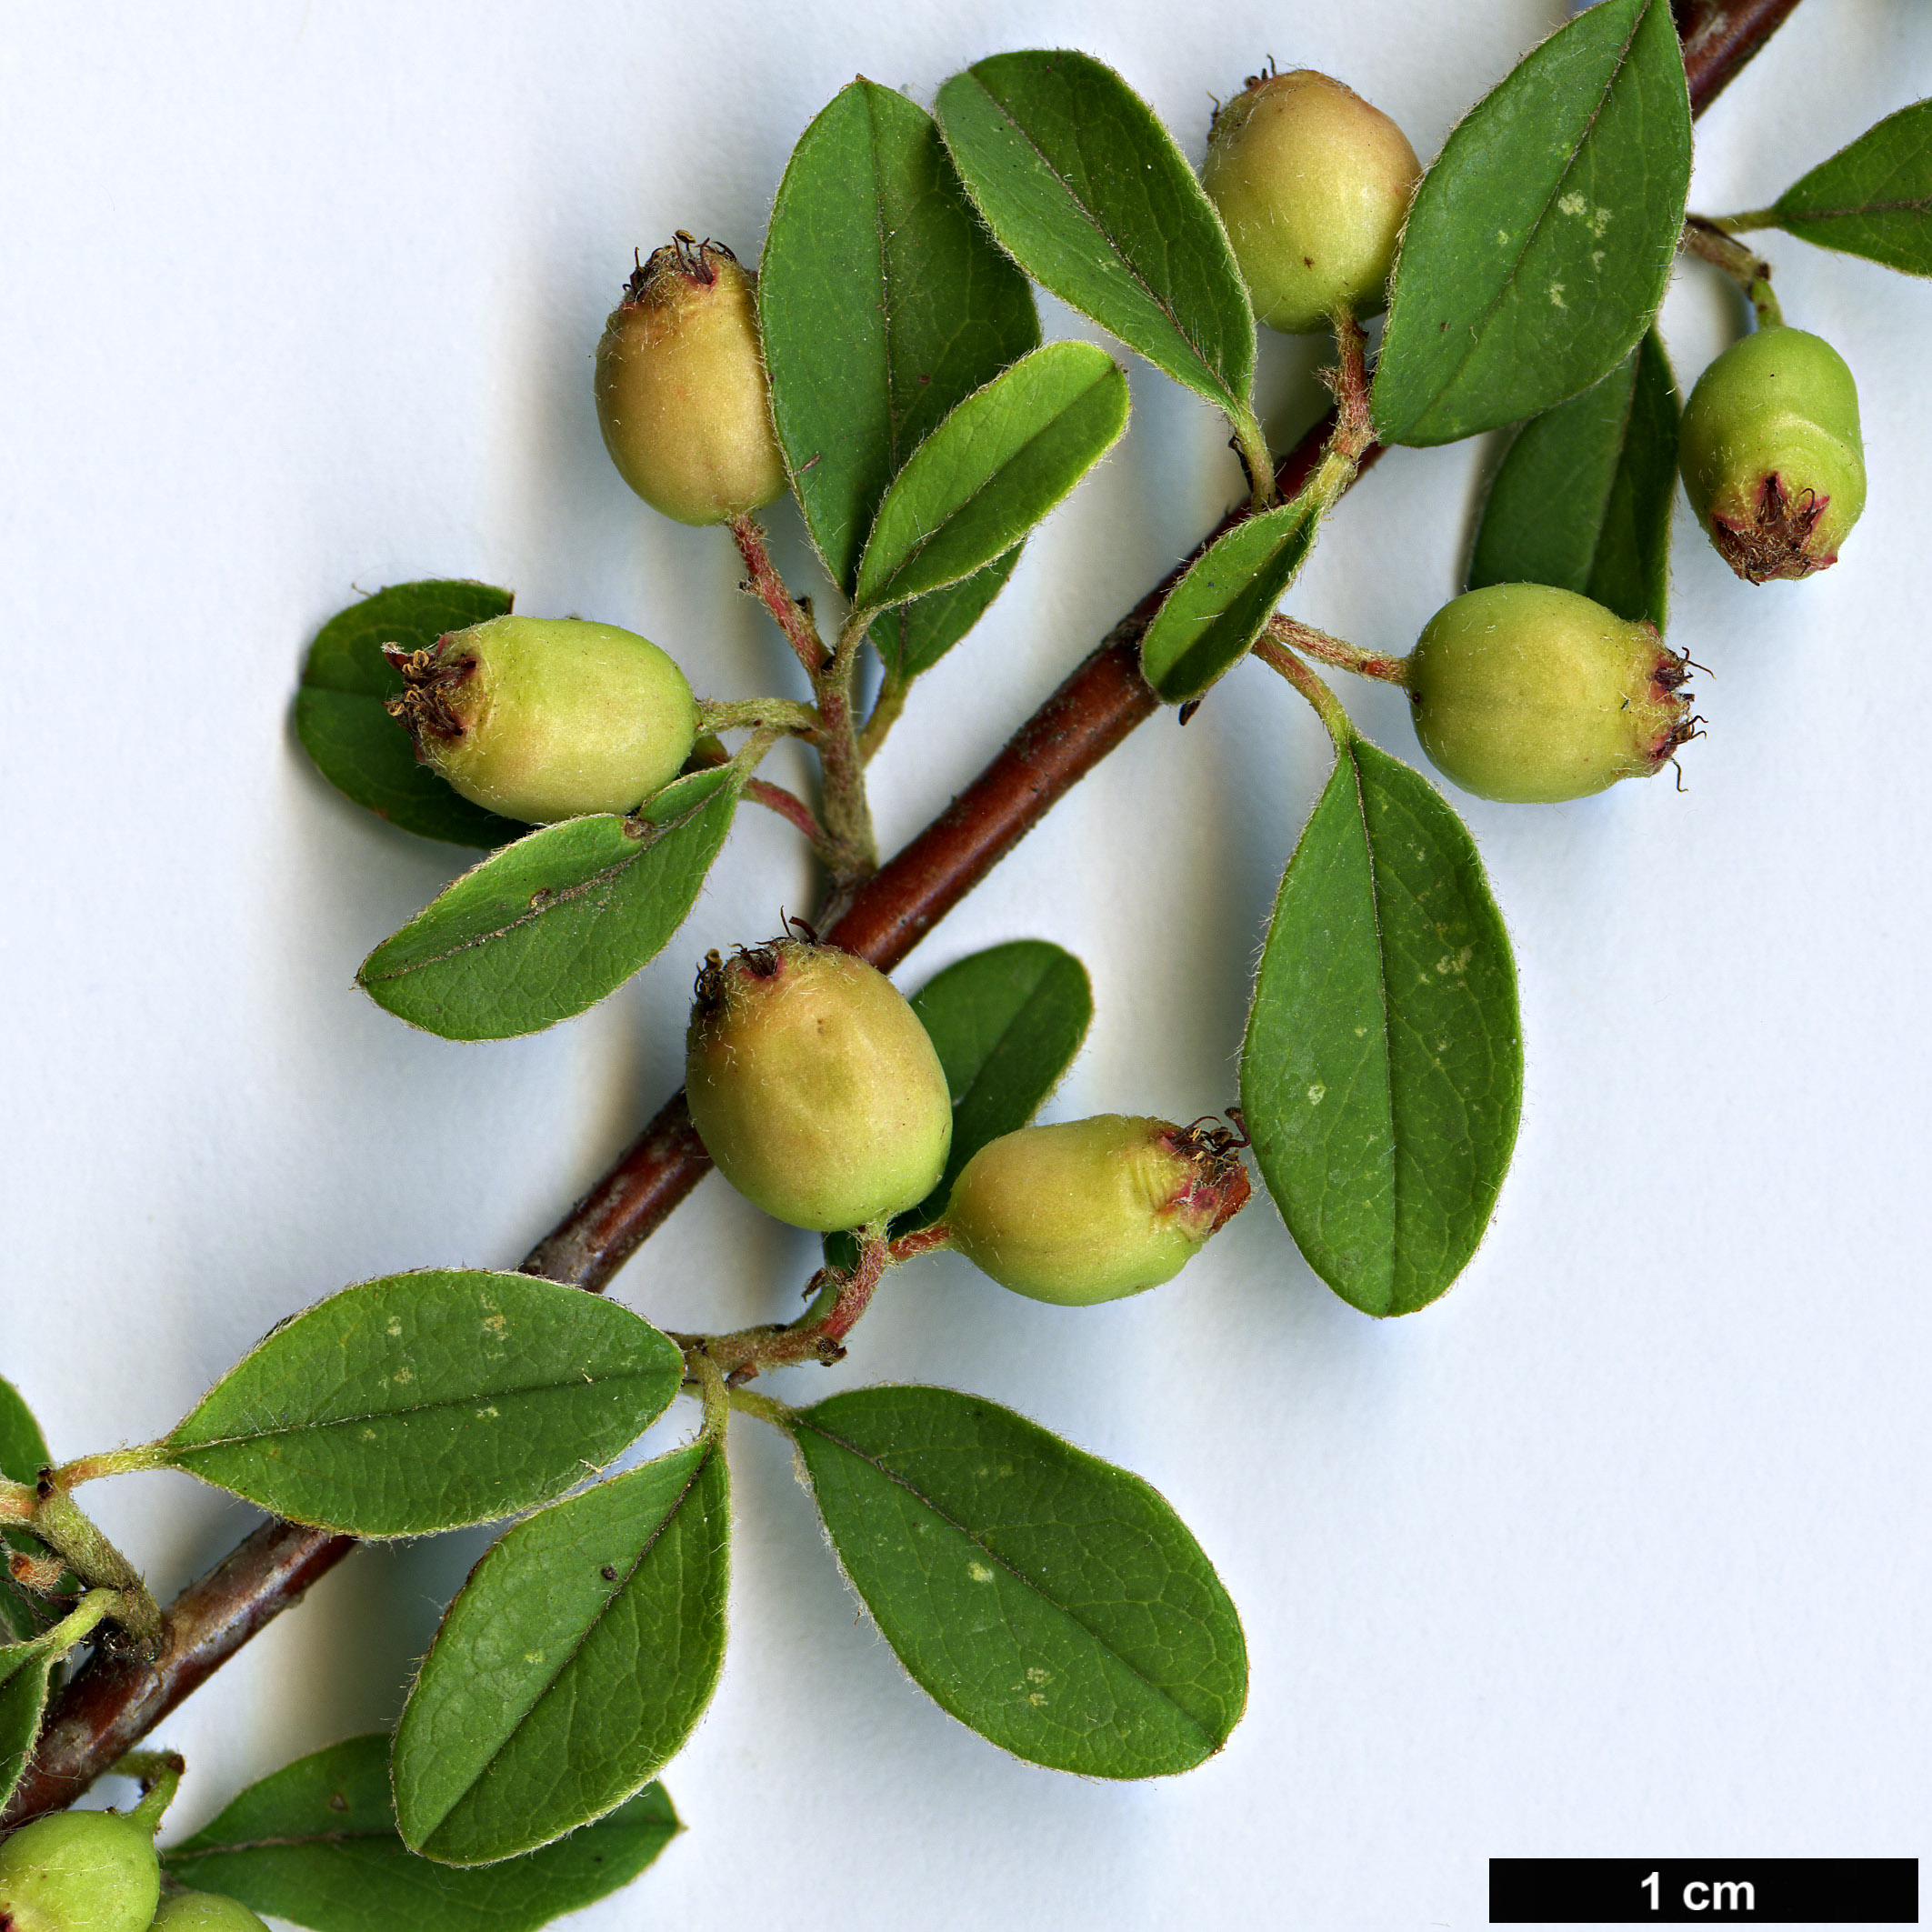 High resolution image: Family: Rosaceae - Genus: Cotoneaster - Taxon: ludlowii